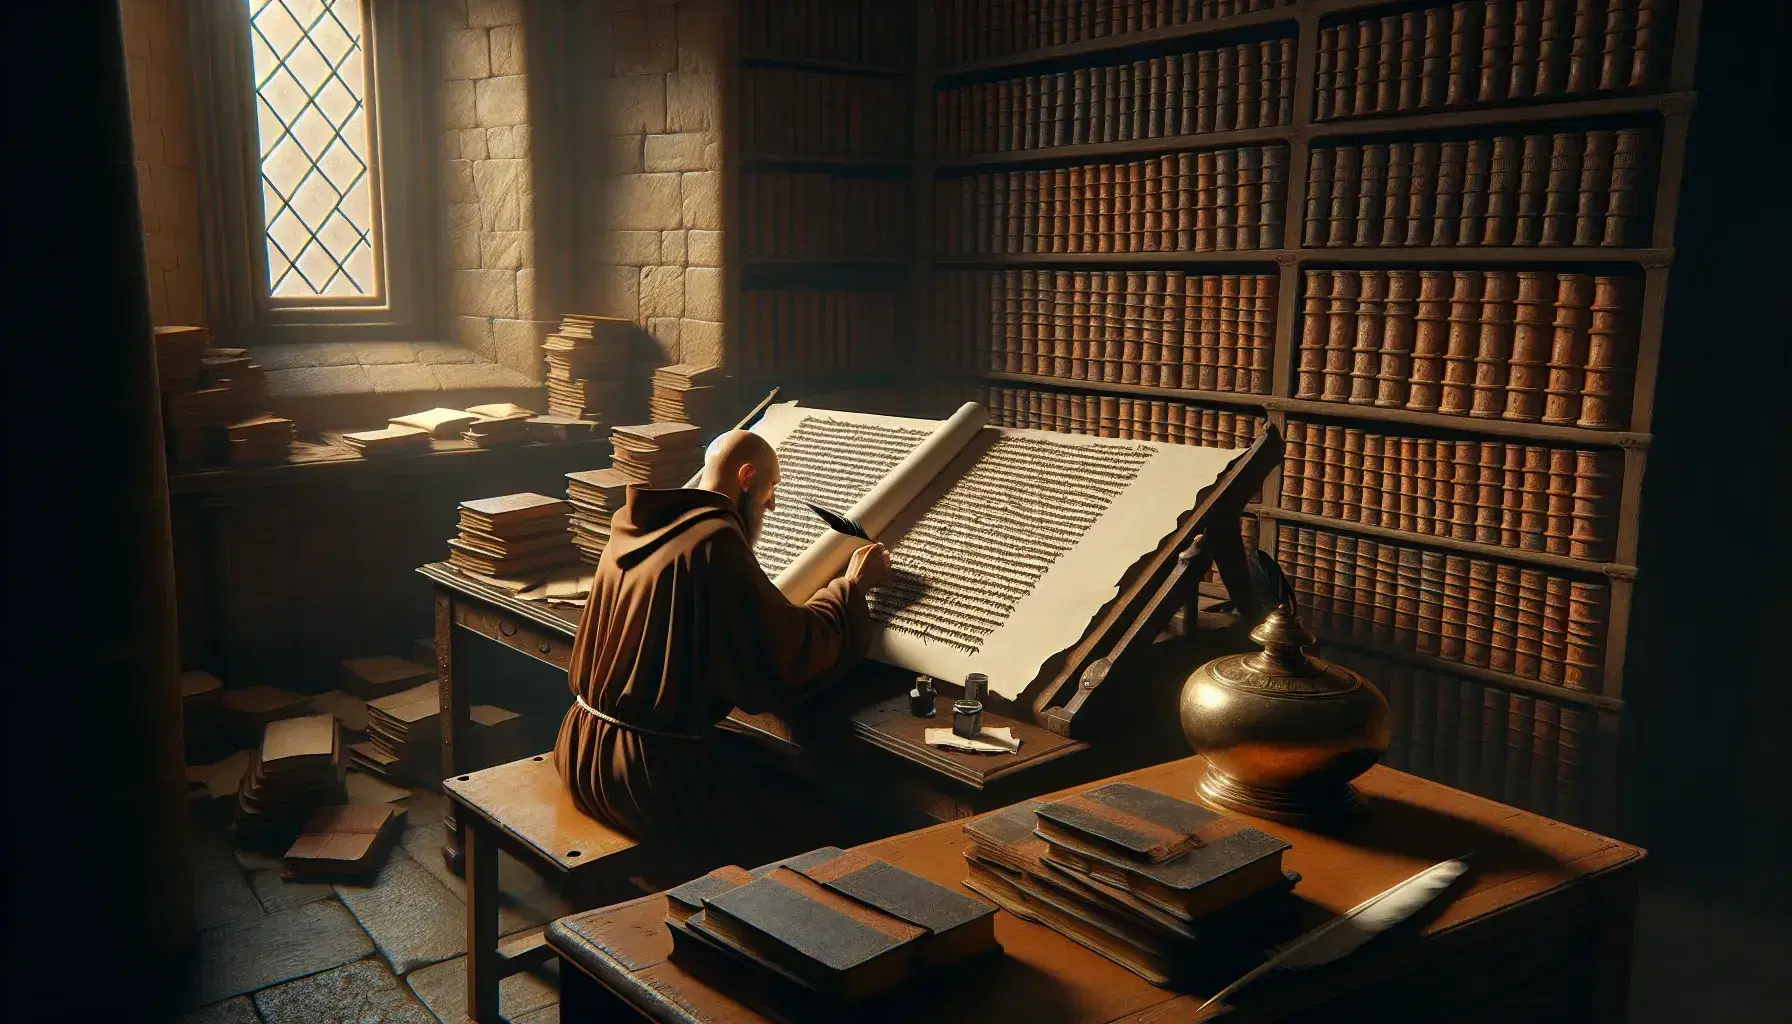 Medieval scriptorium with monks copying manuscripts, one seated at a desk with a quill and inkwell, another at a lectern, in a room with arched windows and bookshelves.